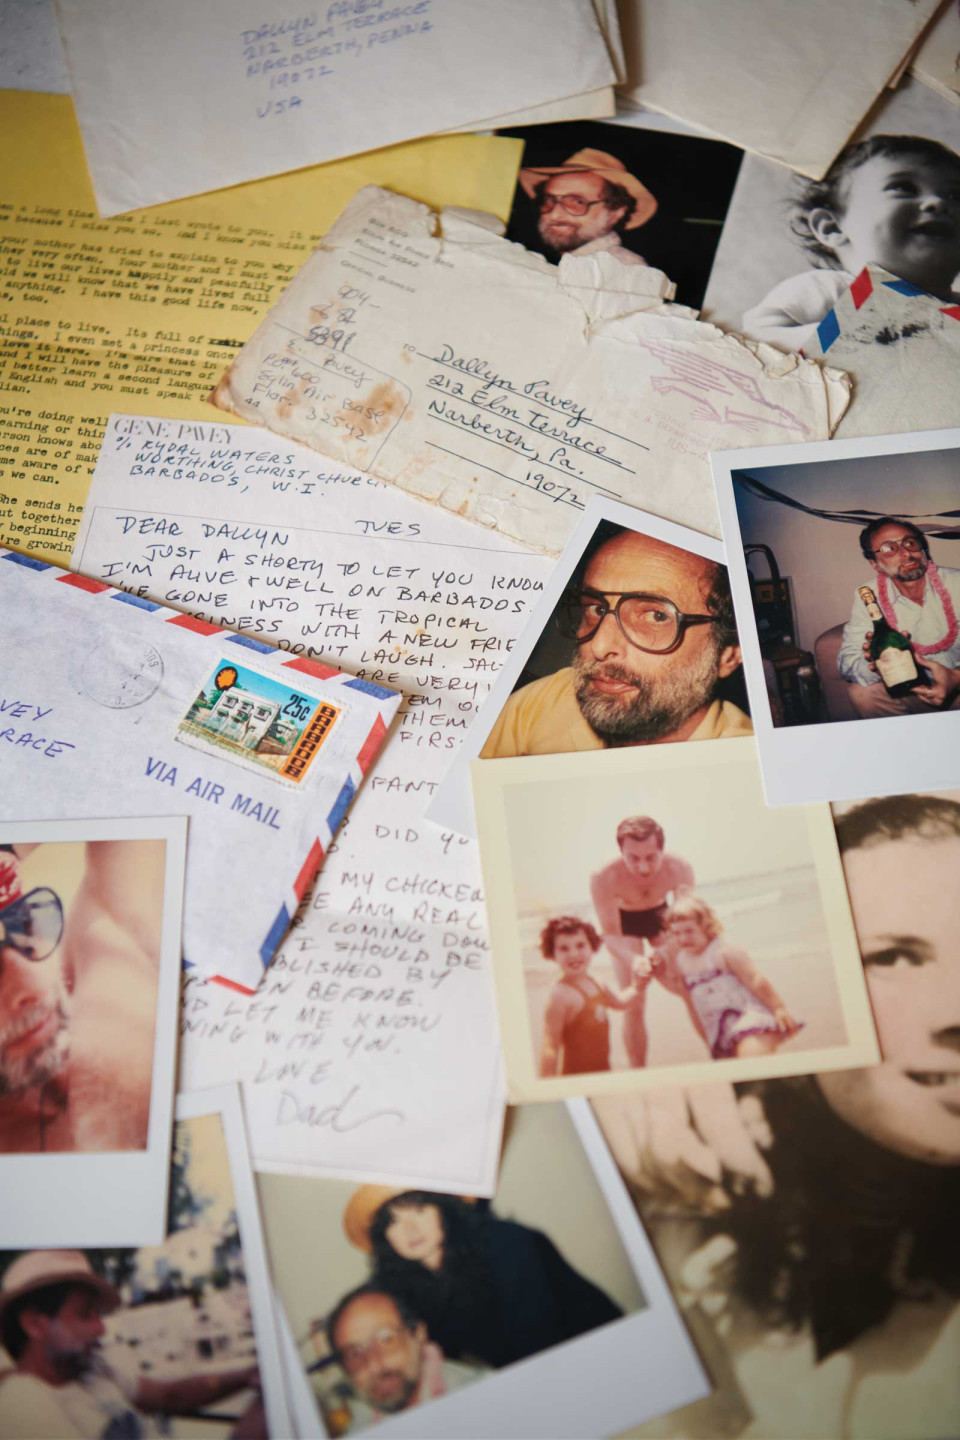 dallyn pavey's photos, letters and clues about her missing father, gene pavey